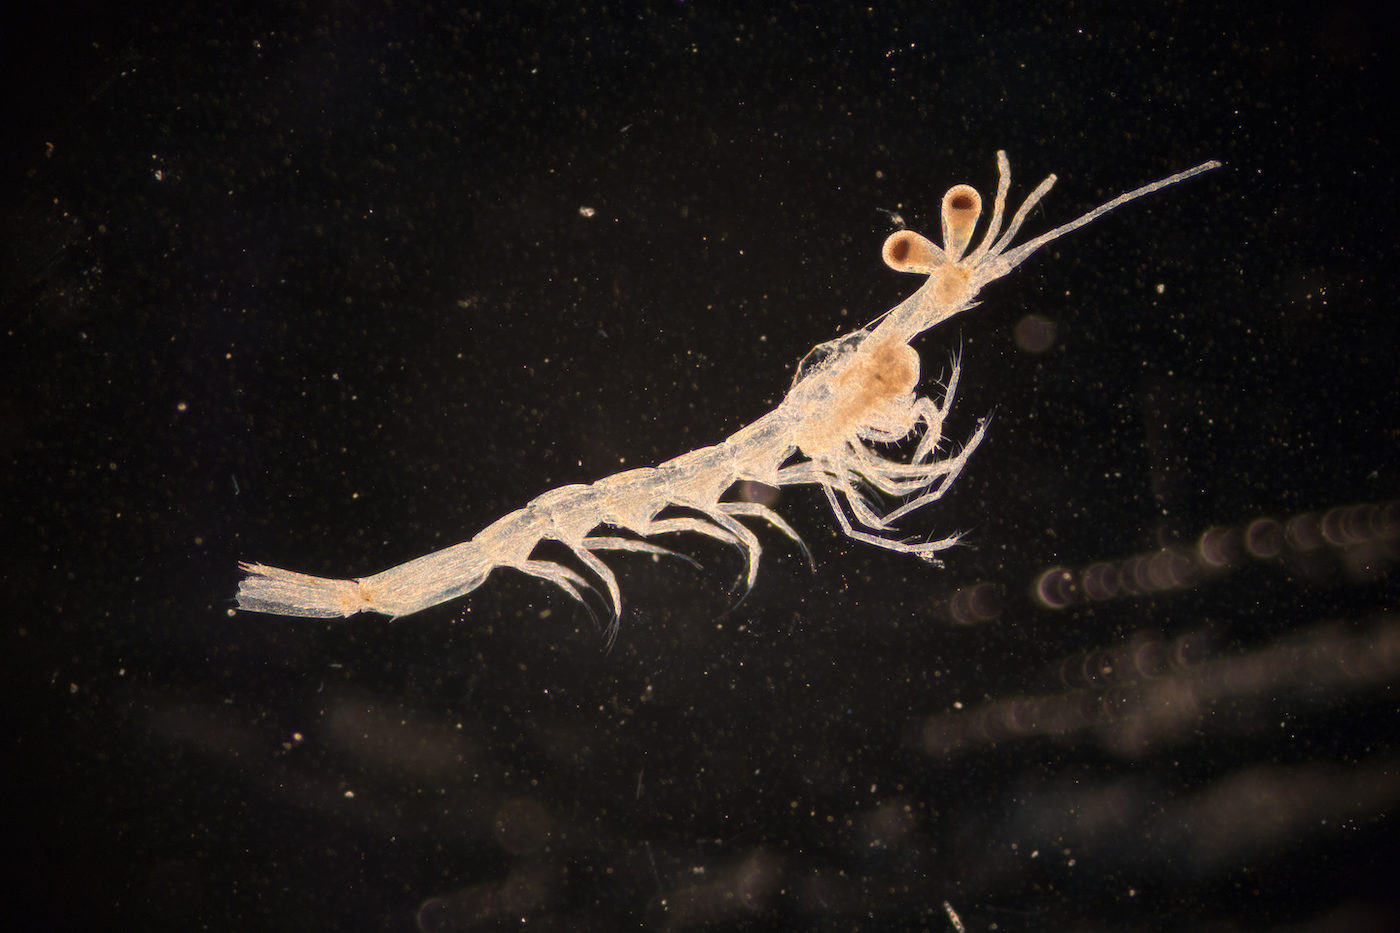 Acid rain: it's not over yet for this tiny shrimp | The Narwhal